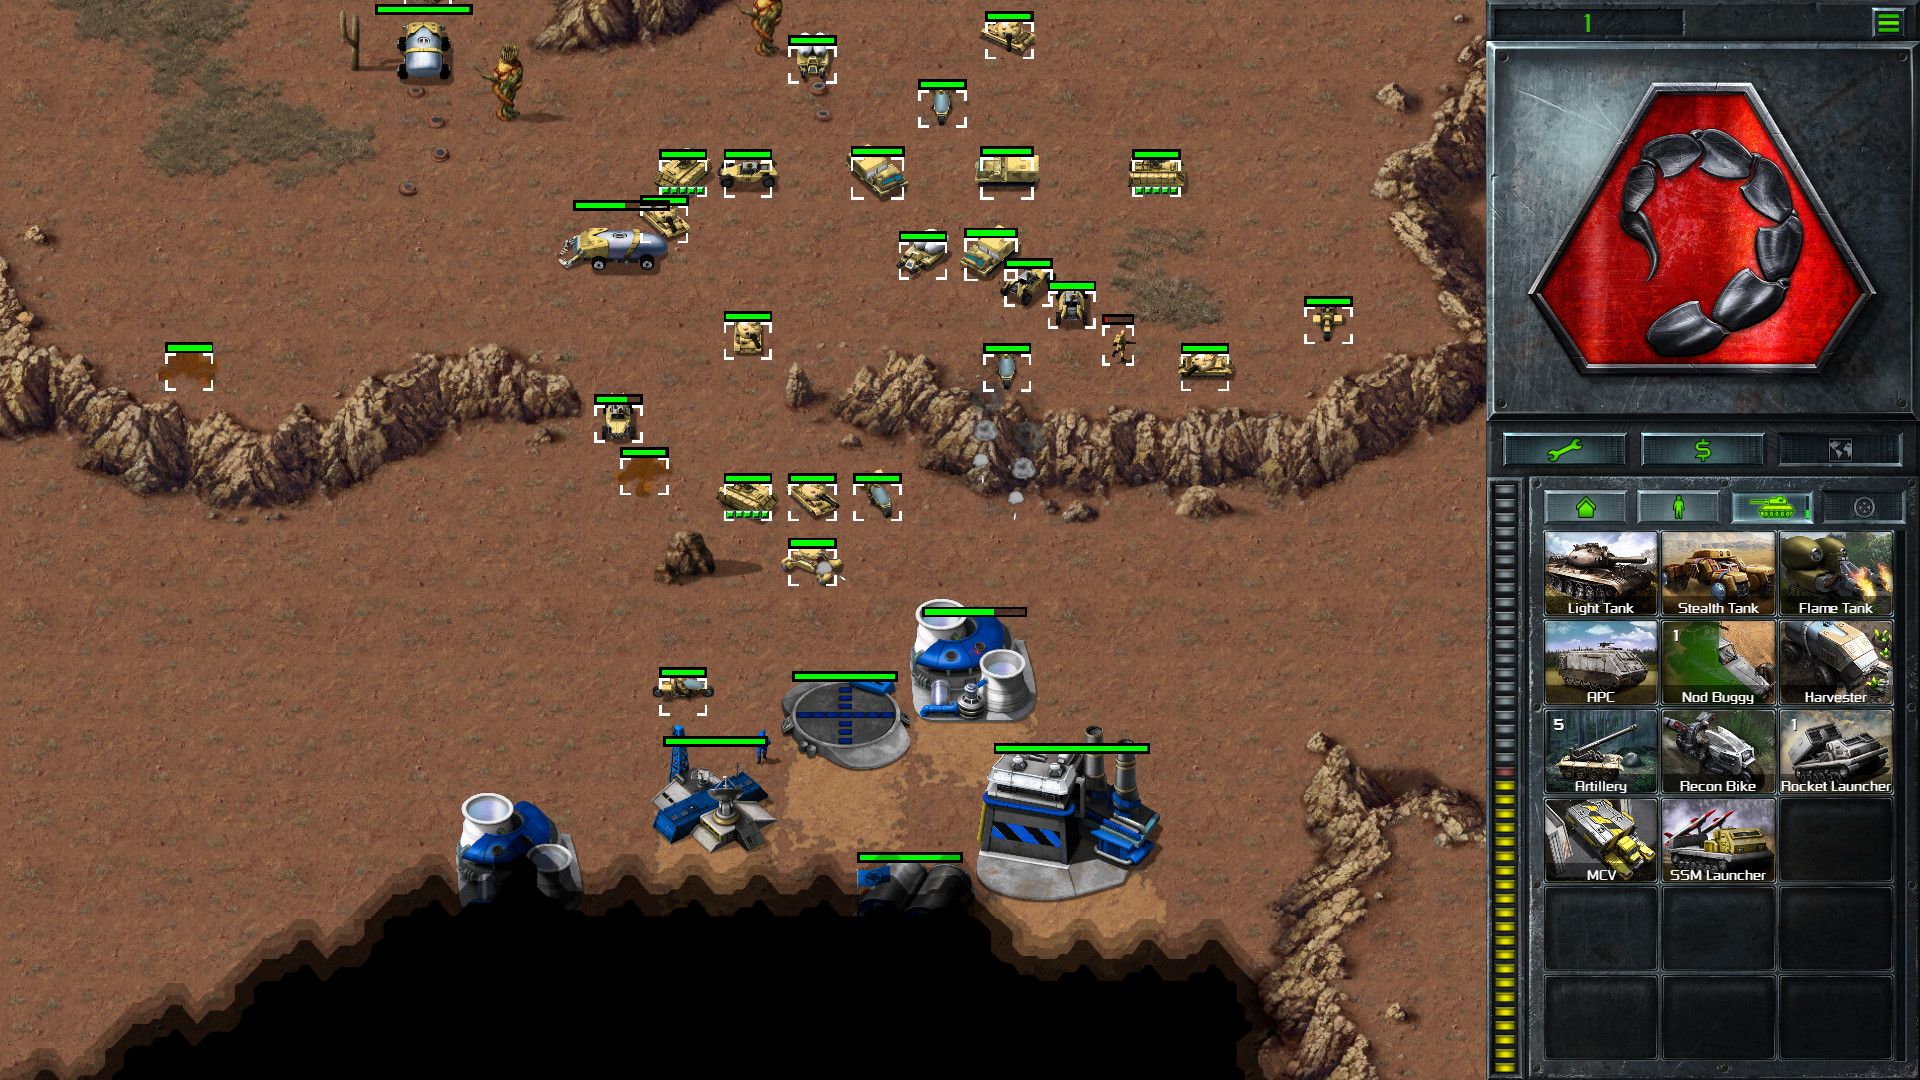 Steam command and conquer collection фото 25